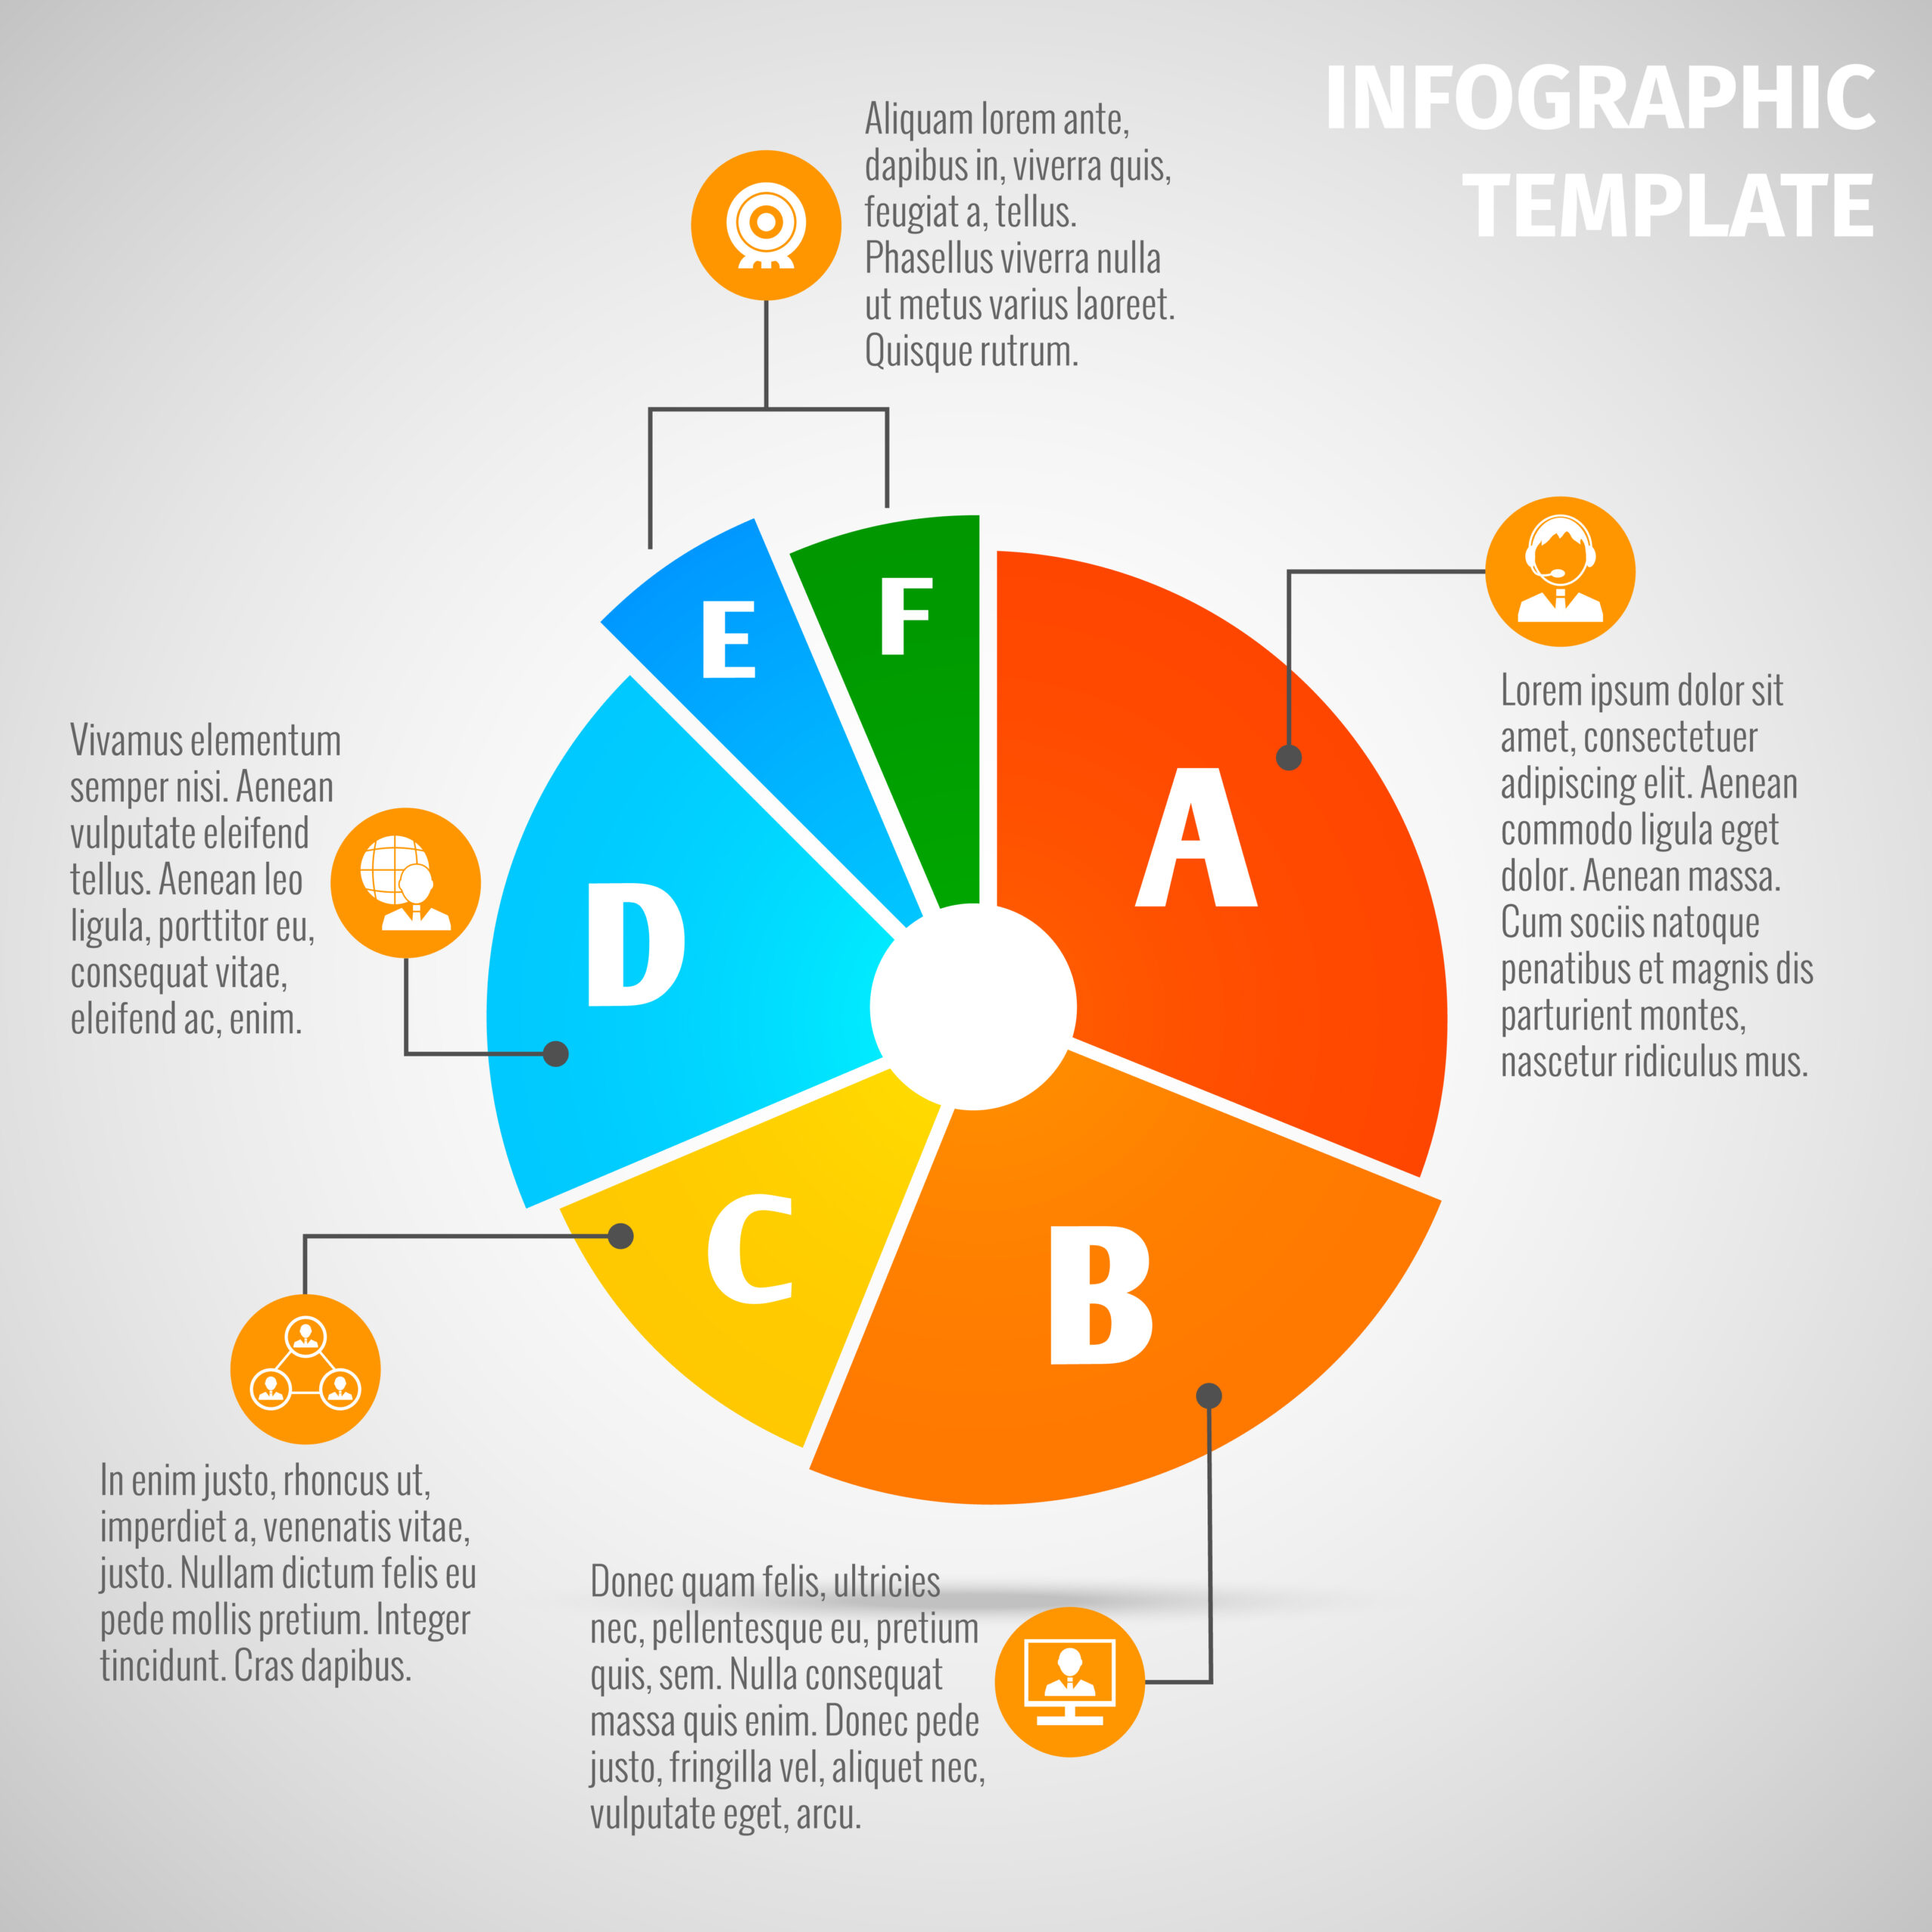 6 Most Popular Charts Used in Infographics